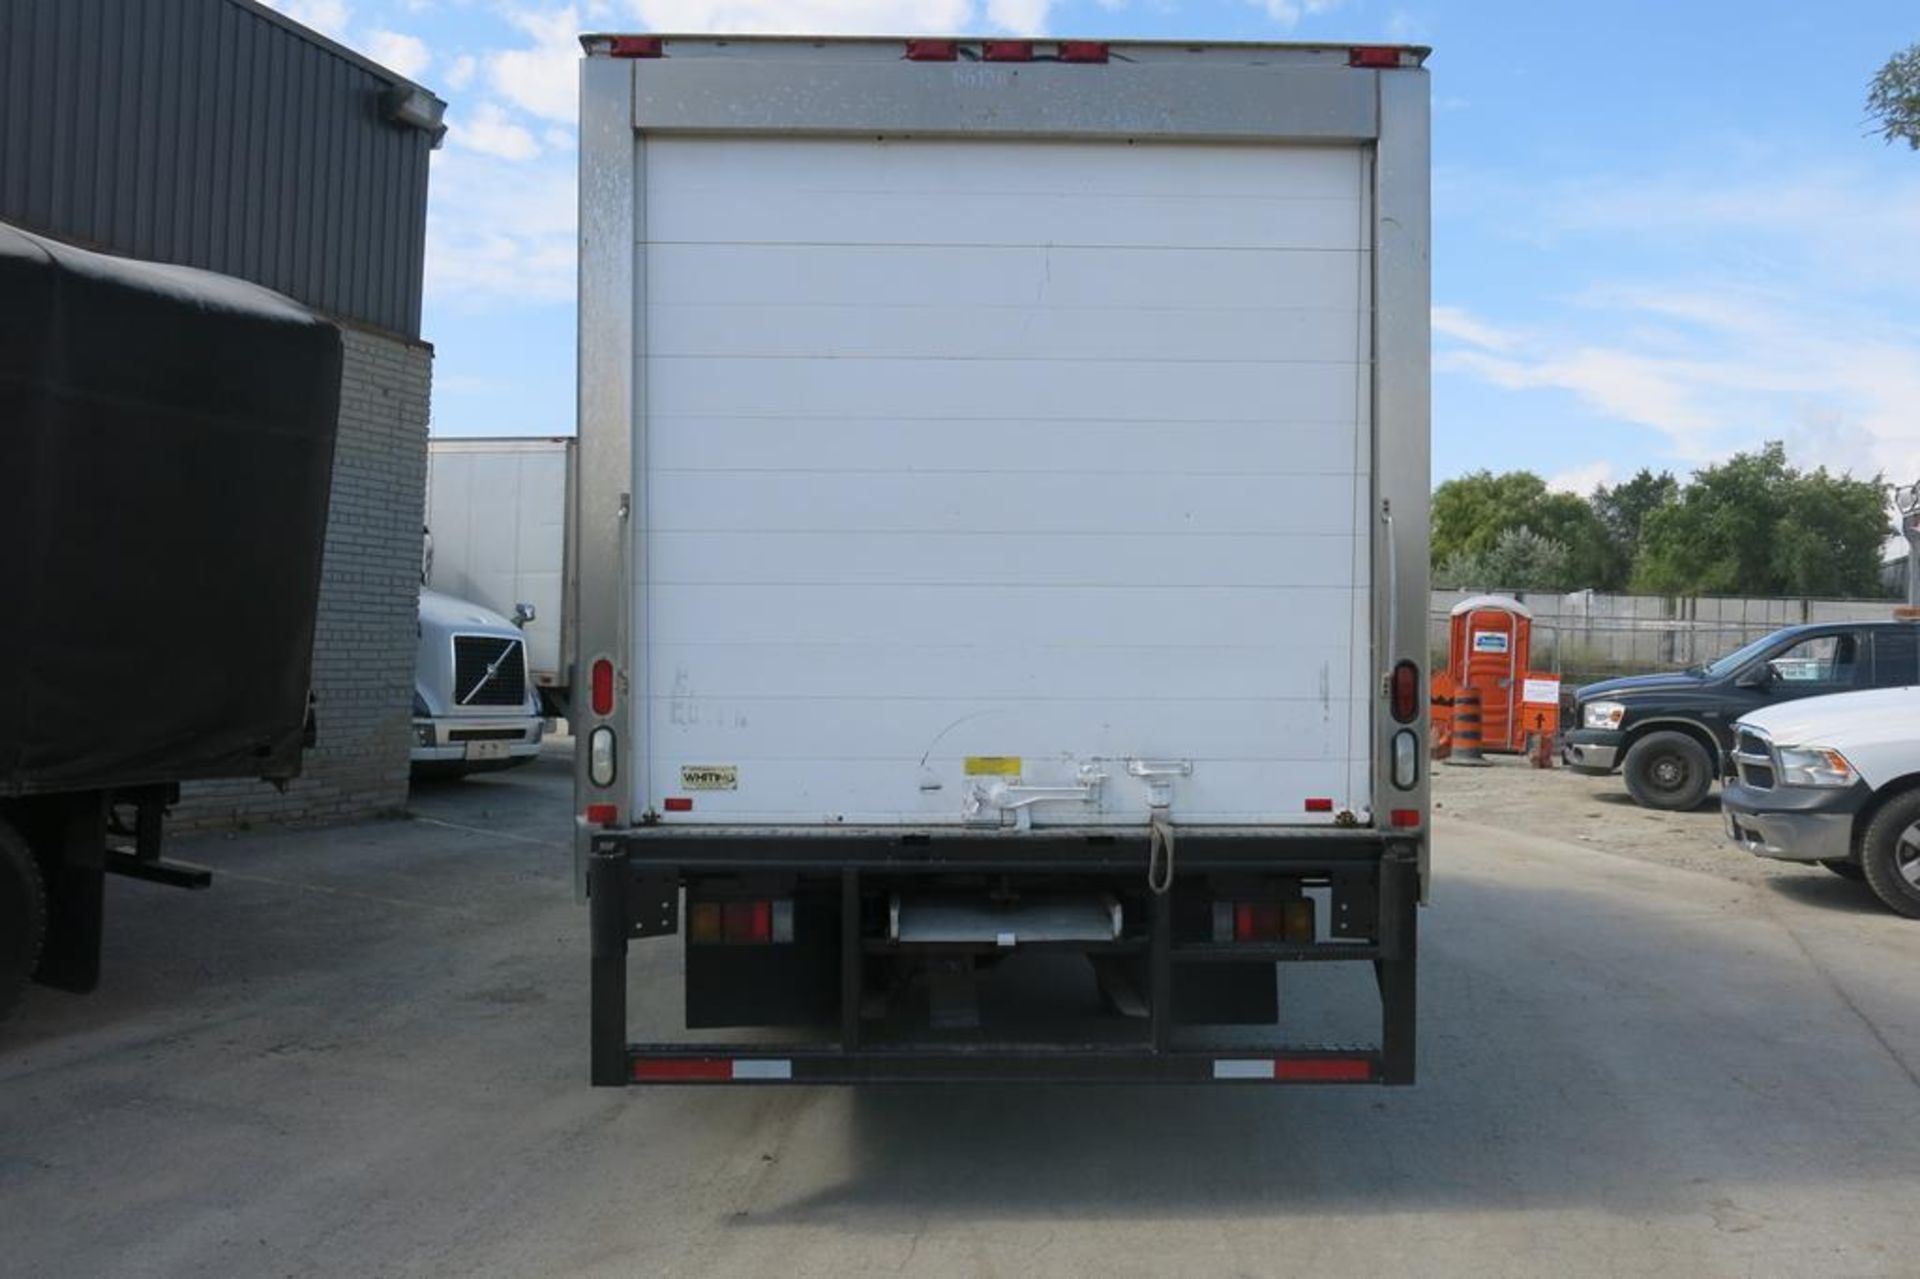 2013, HINO, 195, REEFER TRUCK, MULTIVANS, 18', INSULATED BOX, THERMOKING, T800 WHISPER, REEFER, - Image 6 of 26